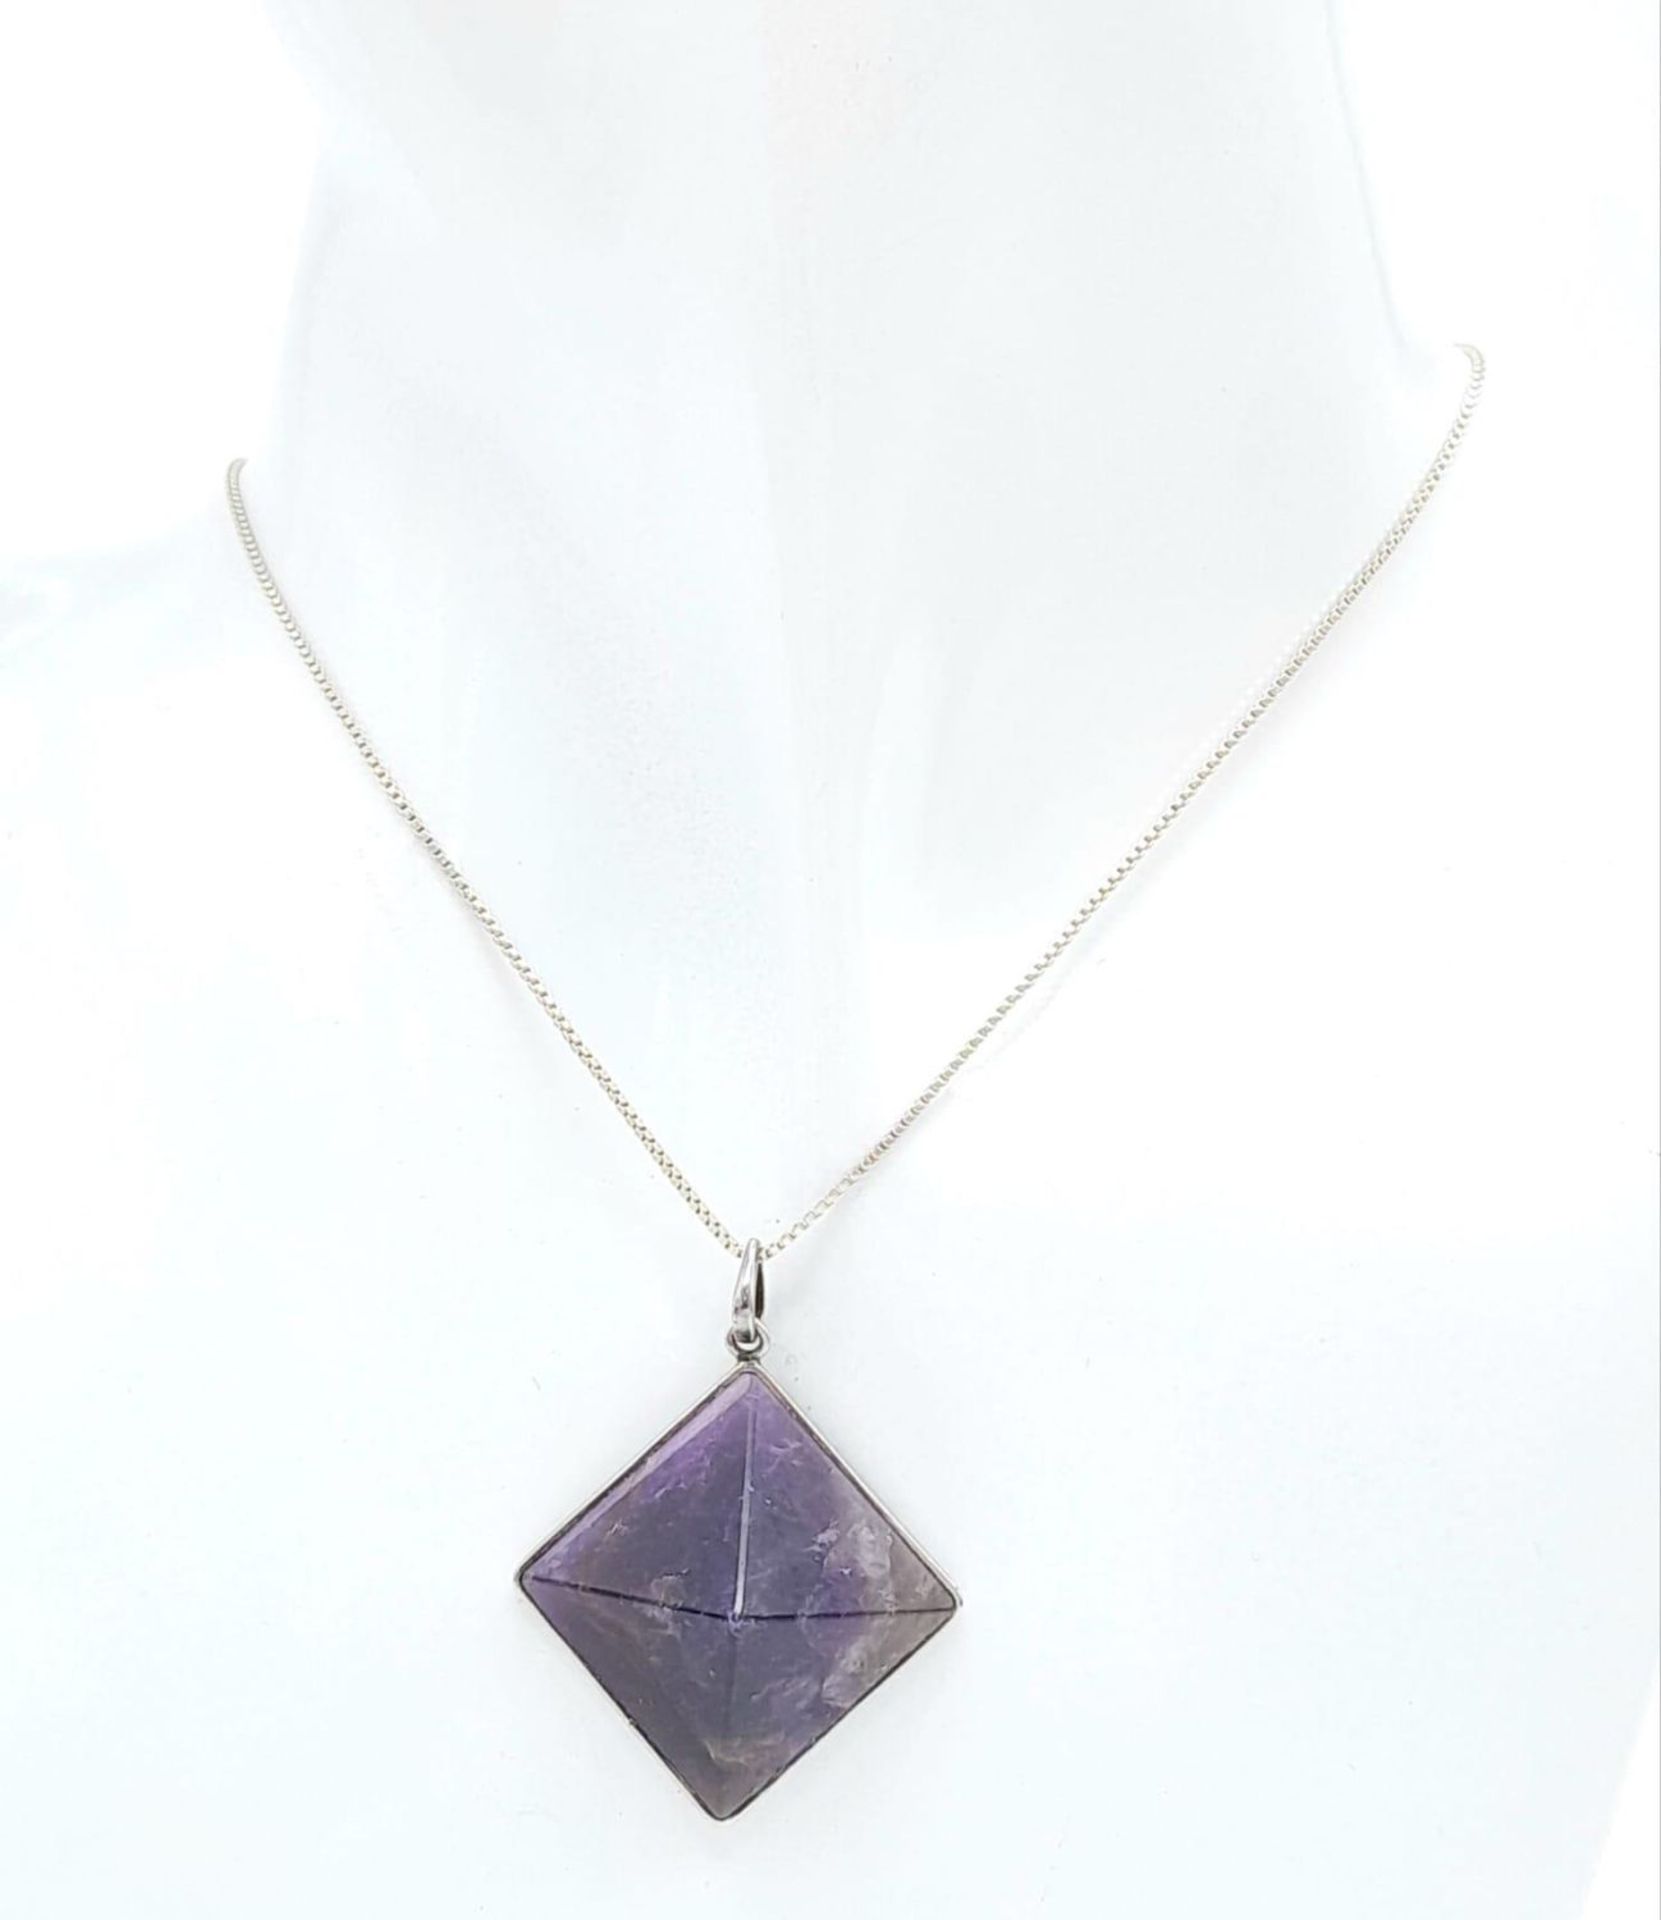 A Sterling Silver Pyramid Cut Amethyst Pendant Necklace. 37cm Length. Amethyst Measures 2cm Width. - Image 3 of 10